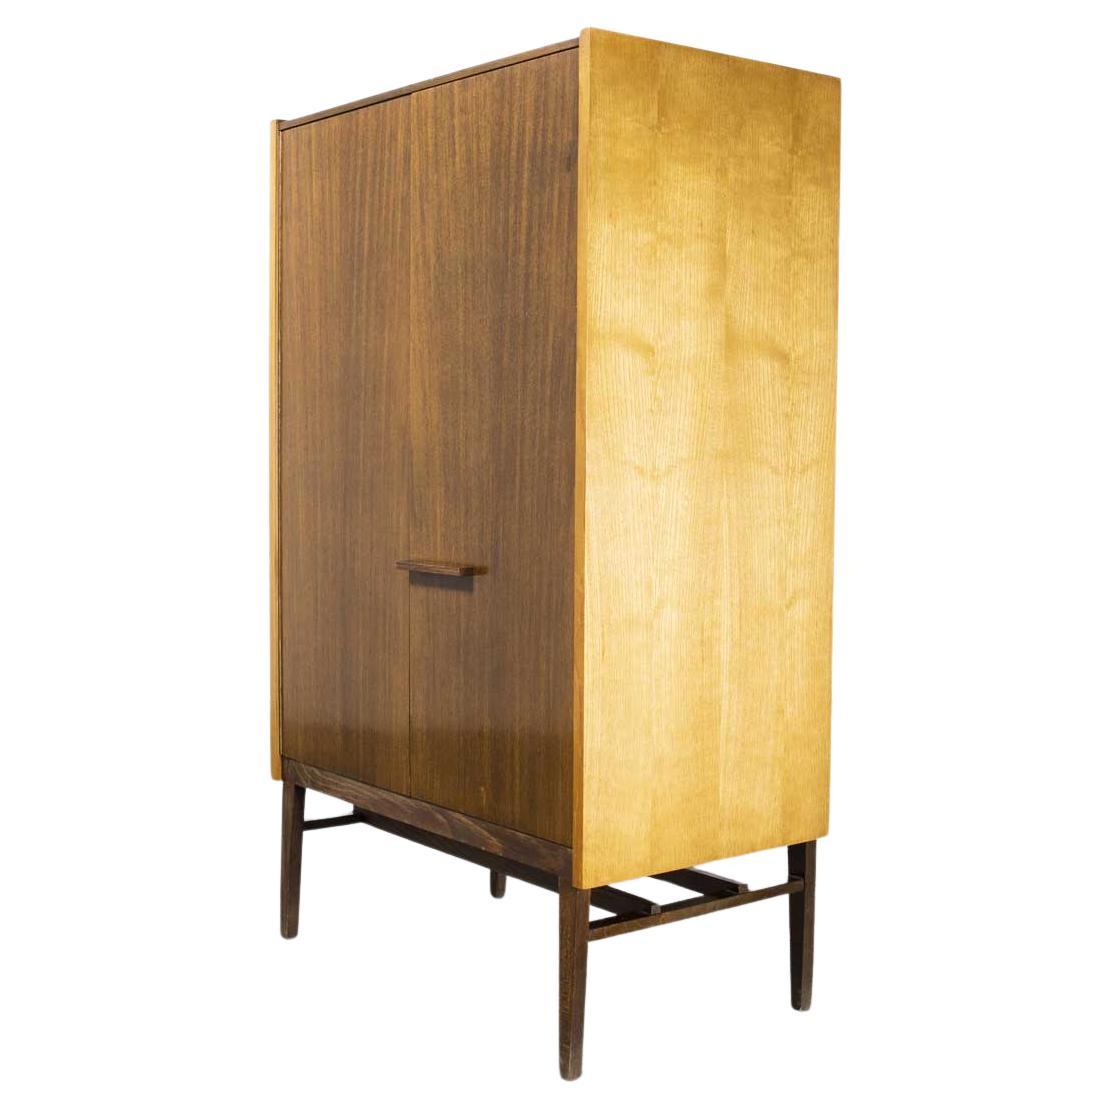 1960's Two Door Large Mid Century Cabinet - Up Zavody For Sale